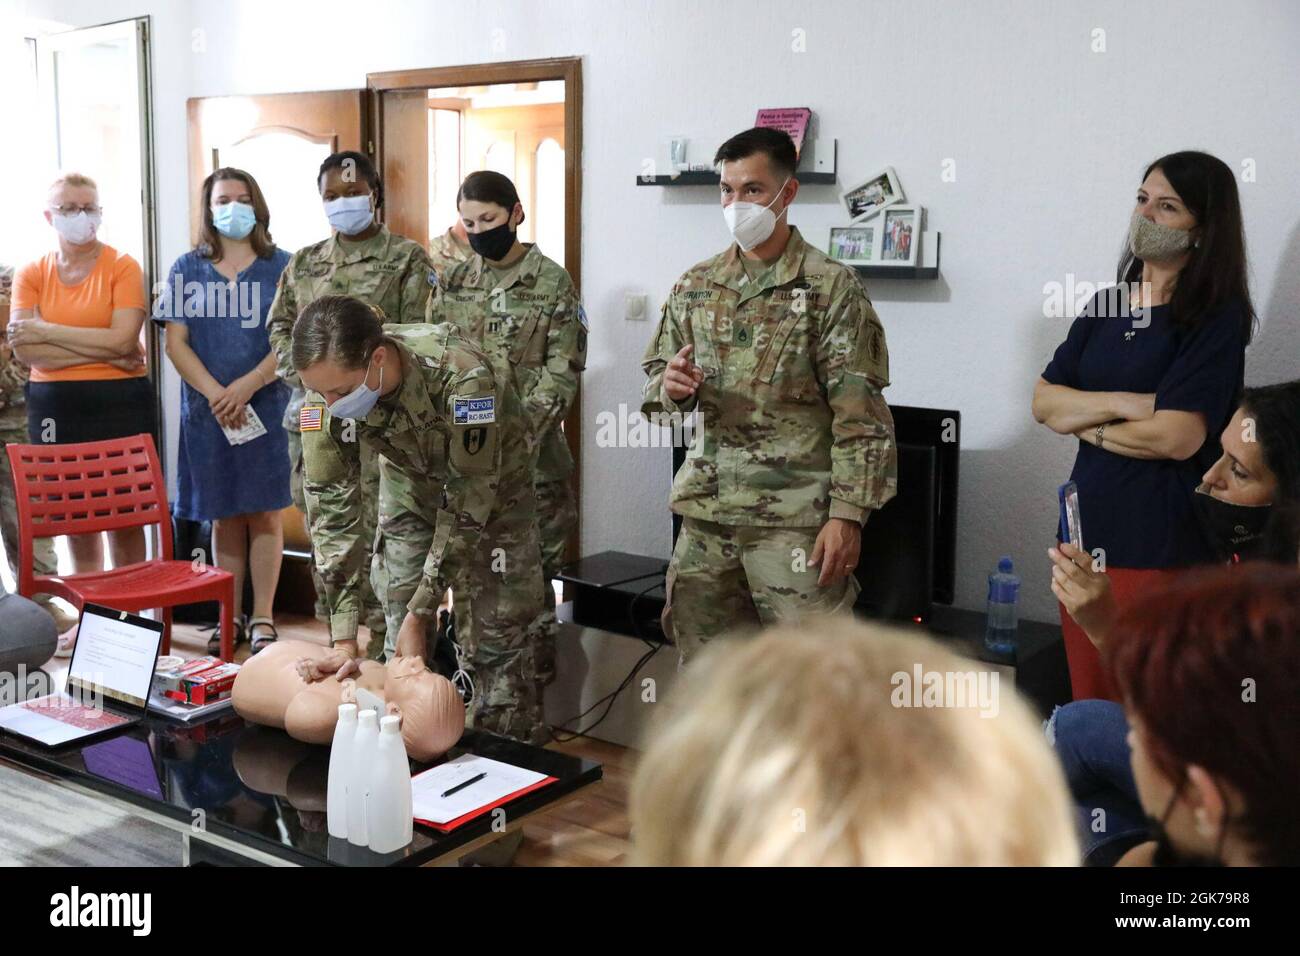 U.S. Army soldiers from Task Force Medical of KFOR Regional Command-East and other supporting units partnered with Non-Government Organization Woman 4 Woman (W4W) to lead an infant and child CPR familiarization session for local women in Gjilan, Kosovo, August 23, 2021. Stock Photo